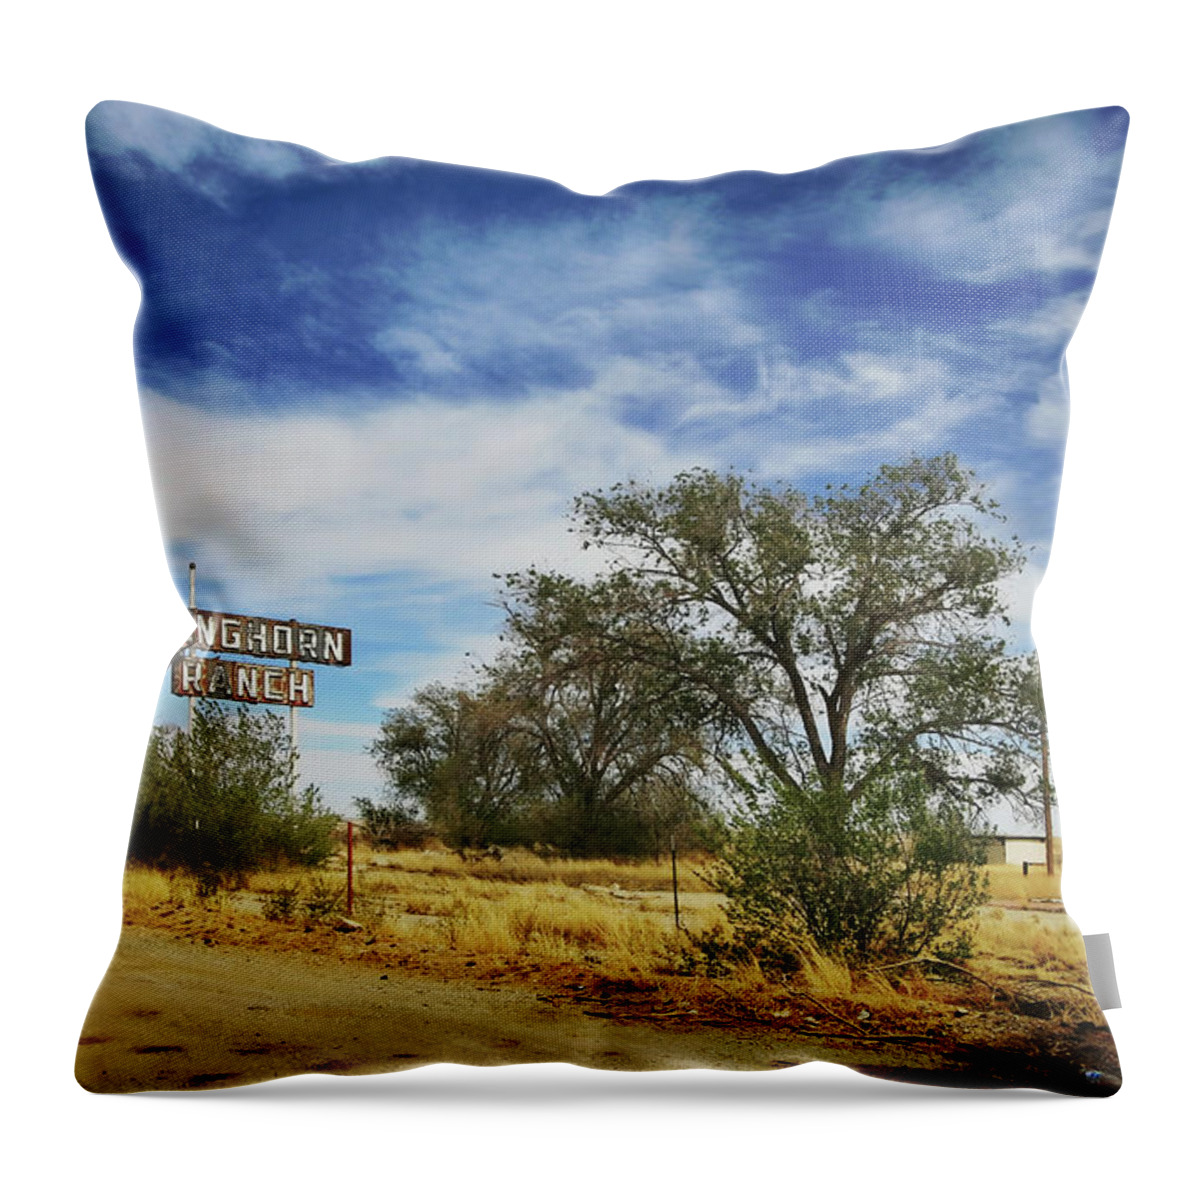 Route 66 Throw Pillow featuring the photograph Longhorn Ranch by Micah Offman